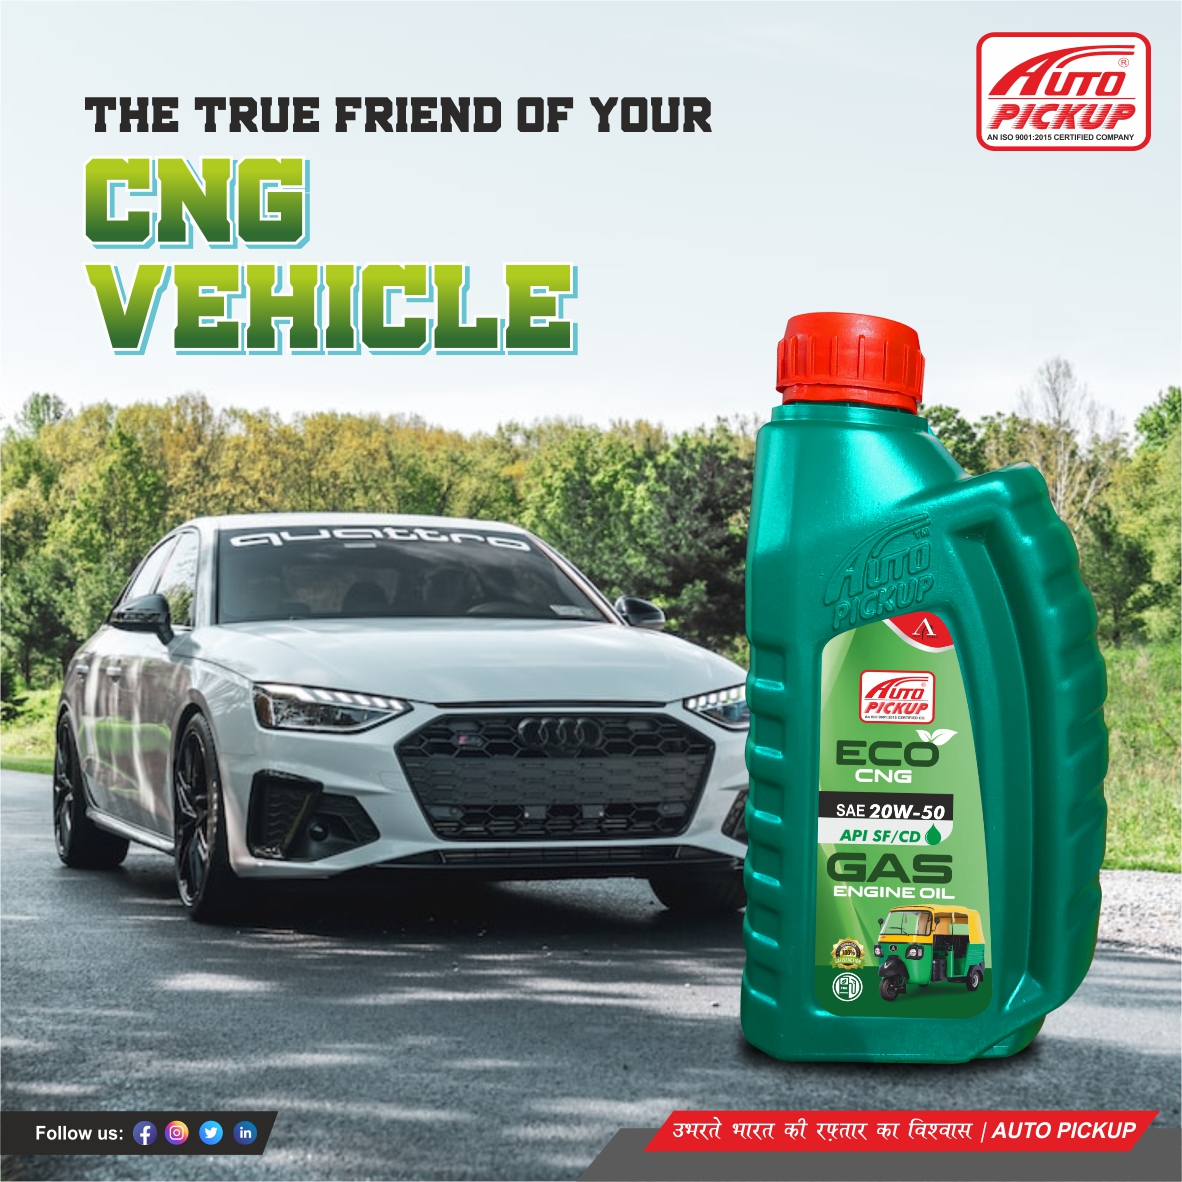 Auto Pickup Is 20W50 CNG Gas Engine Oil! 🌿.🚗🛢️

Get more details about our product, connect with us on:
📲 wa.link/xekgd0
🌐 autopickup.in

#EngineOil #20W50 #MotorOil #GasolineEngine #OilDescription #Viscosity #Lubrication #HighTemperature #HighMileage #API